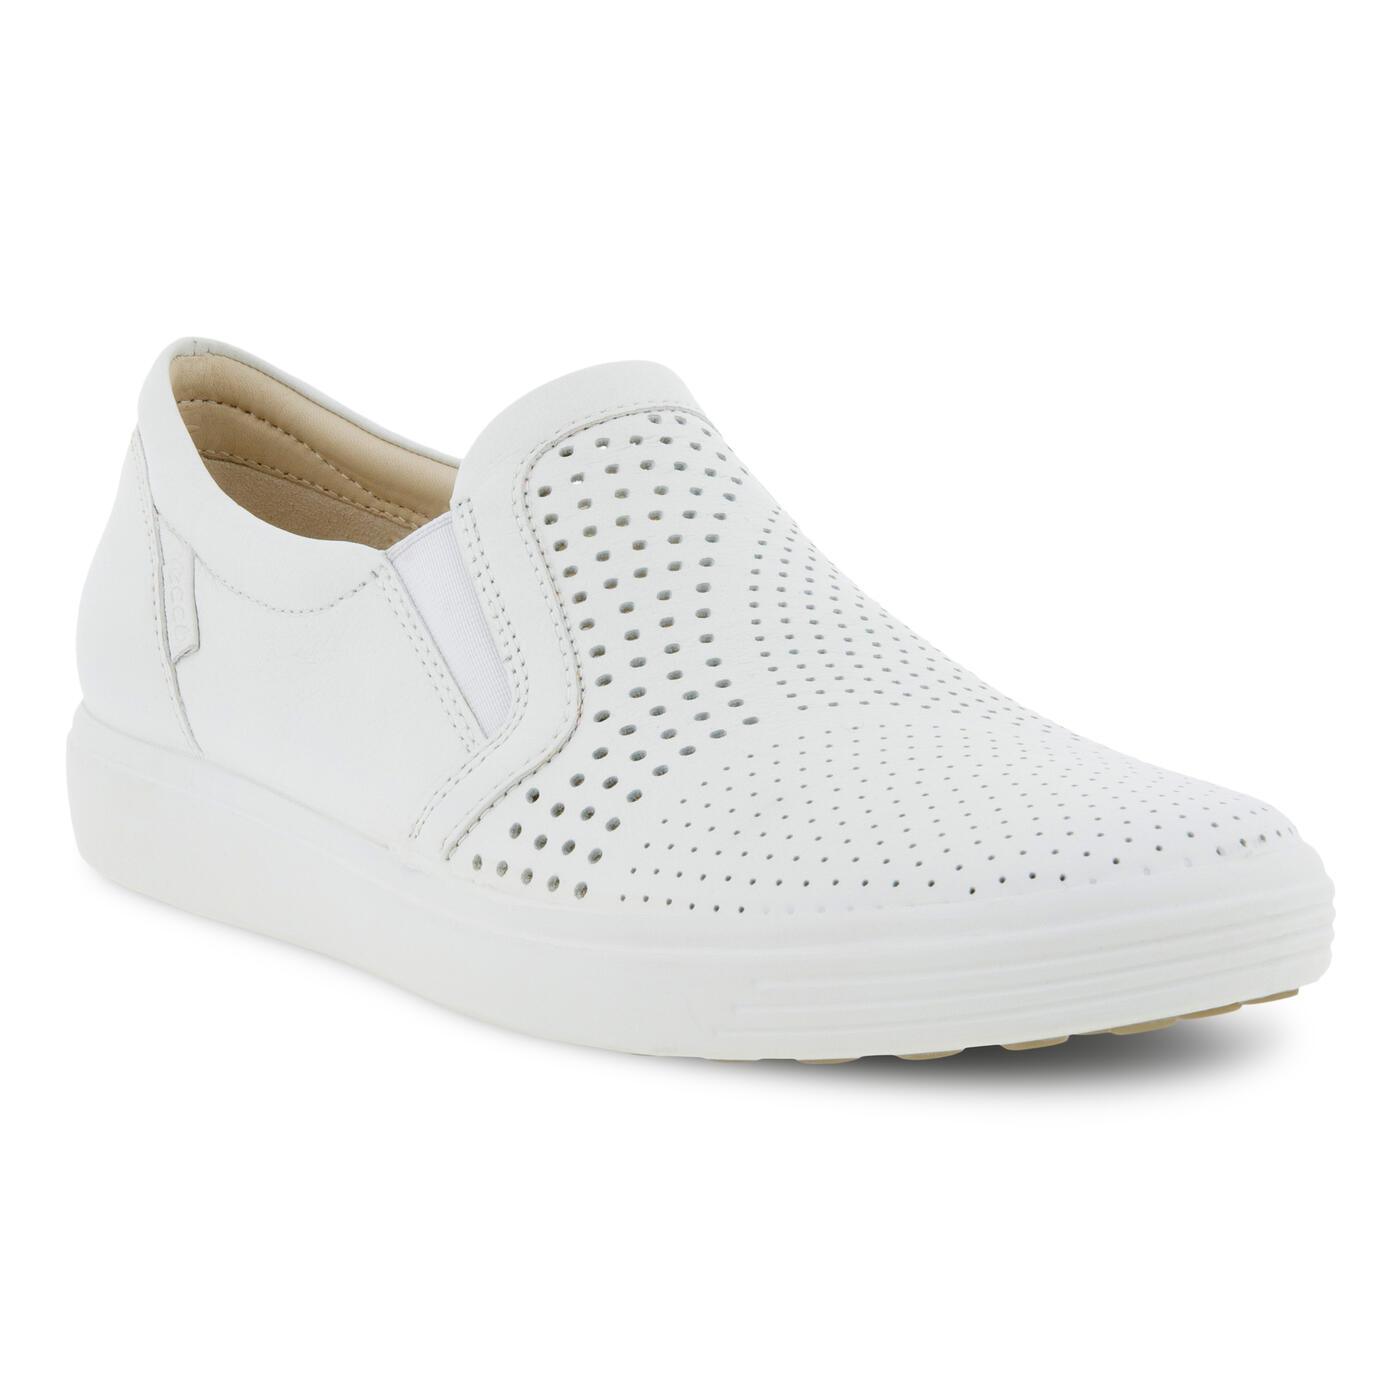 Women's Soft 7 Slip On Sneakers | ECCO® Shoes